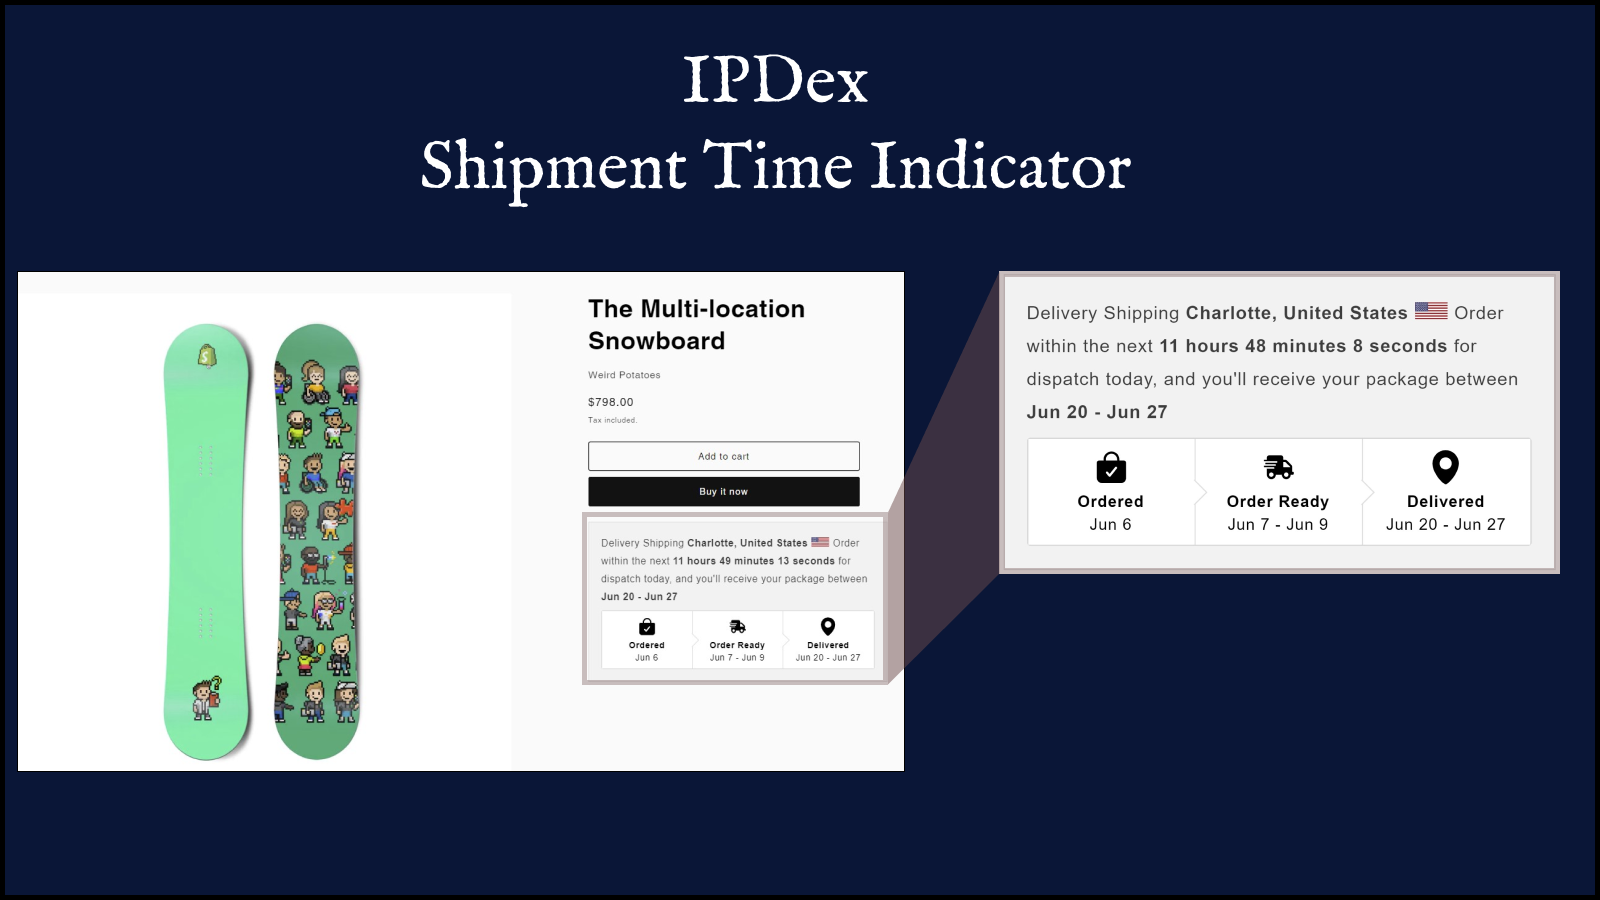 IPDex essential functionality displayed